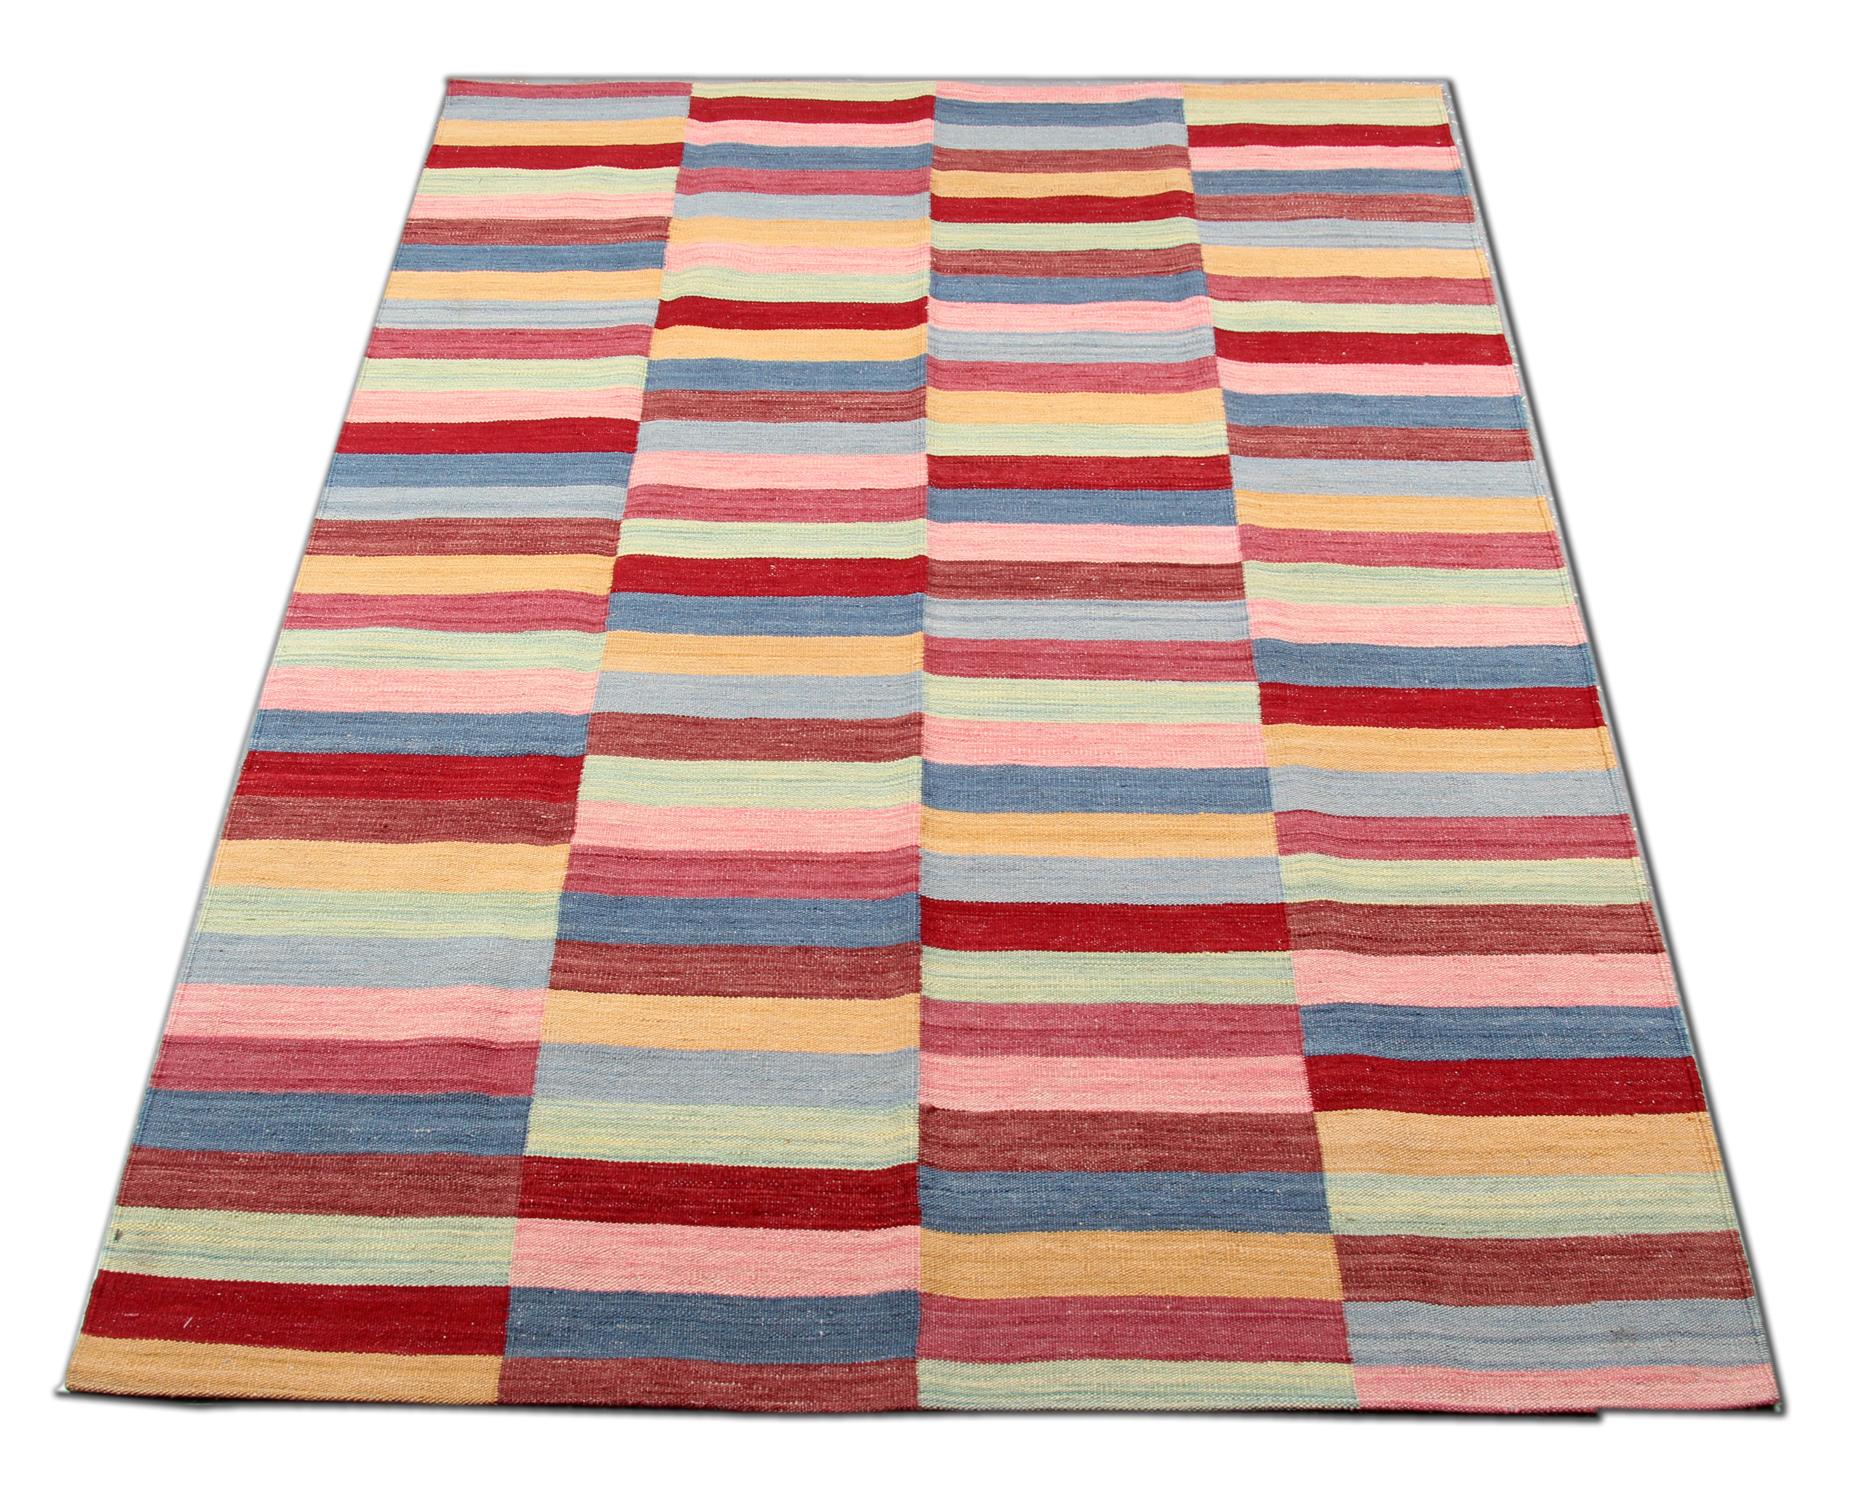 Bold and beautiful this kilim has been woven with a rich block colour pattern in red, green, blue, and pink colours. This striped wool Kilim rug is entirely hand-woven, constructed in Afghanistan using natural fibres and organic dyes. No chemicals